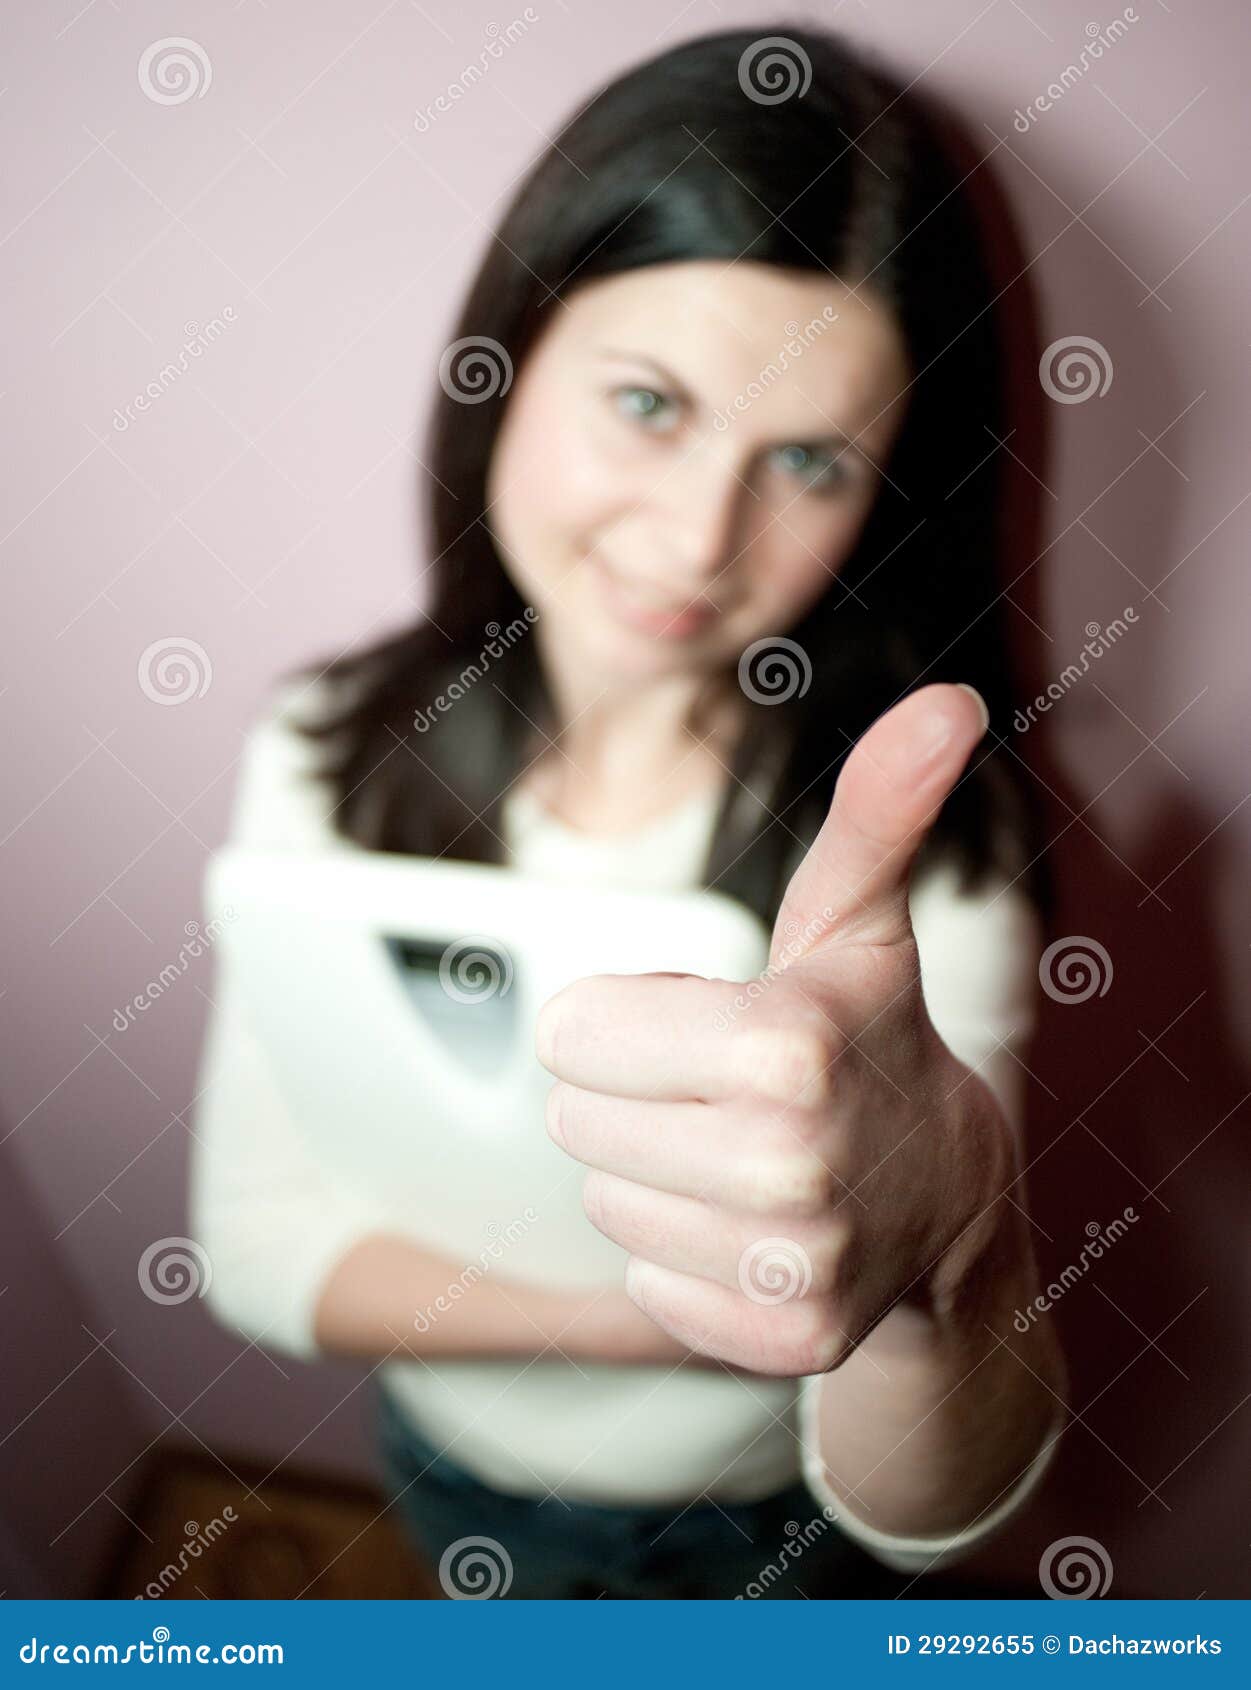 Good weight. Close-up of woman with Close-up of woman with thumbs-up sign